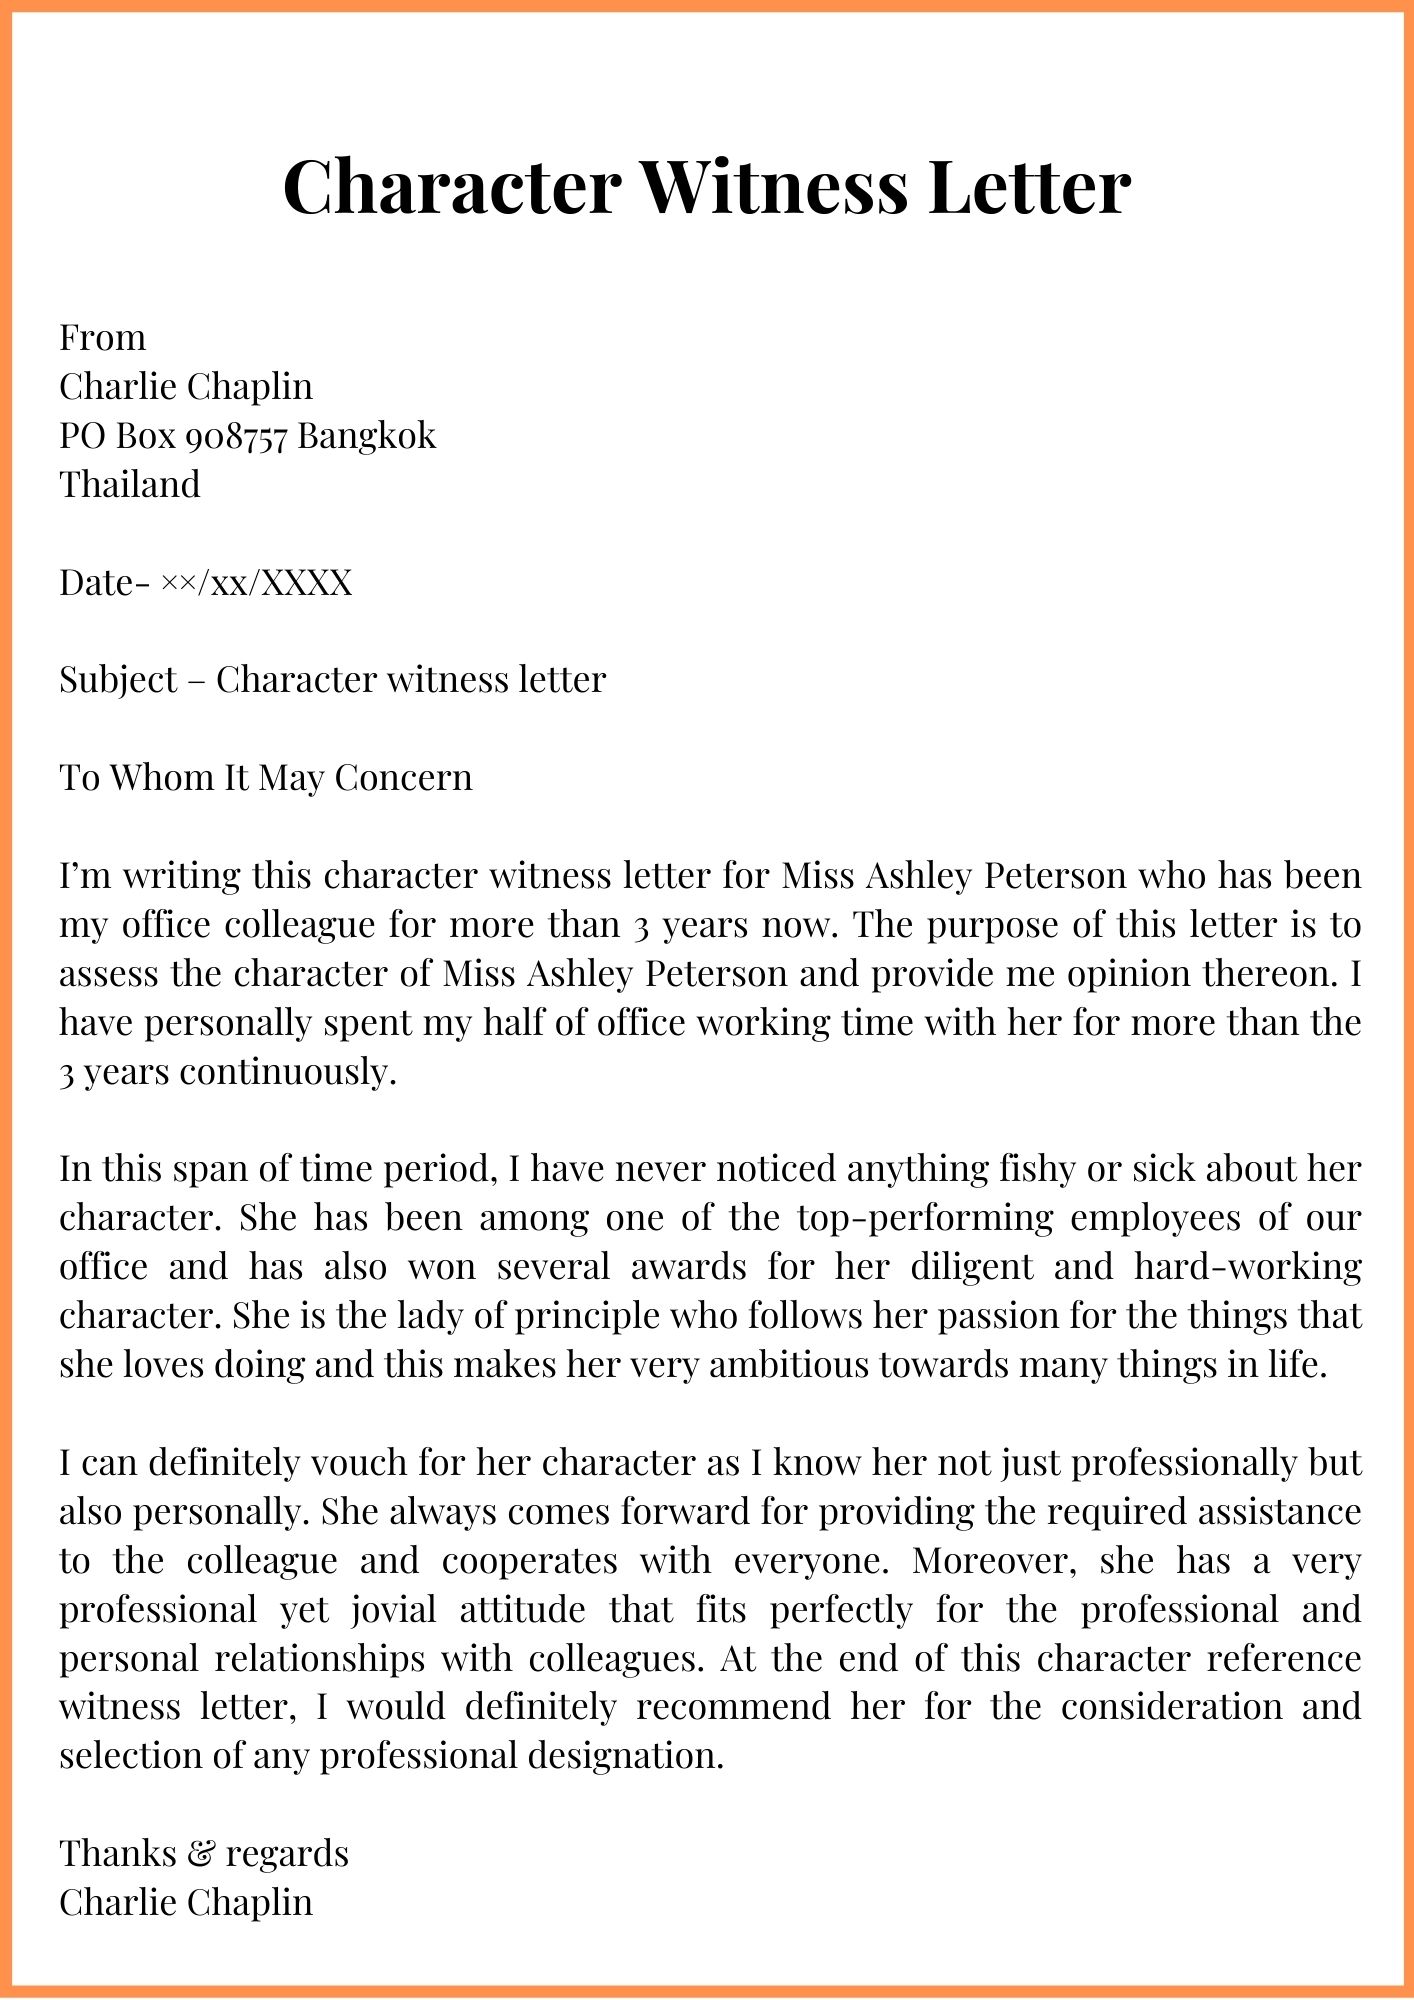 Character Witness Letter Template with Examples & Samples